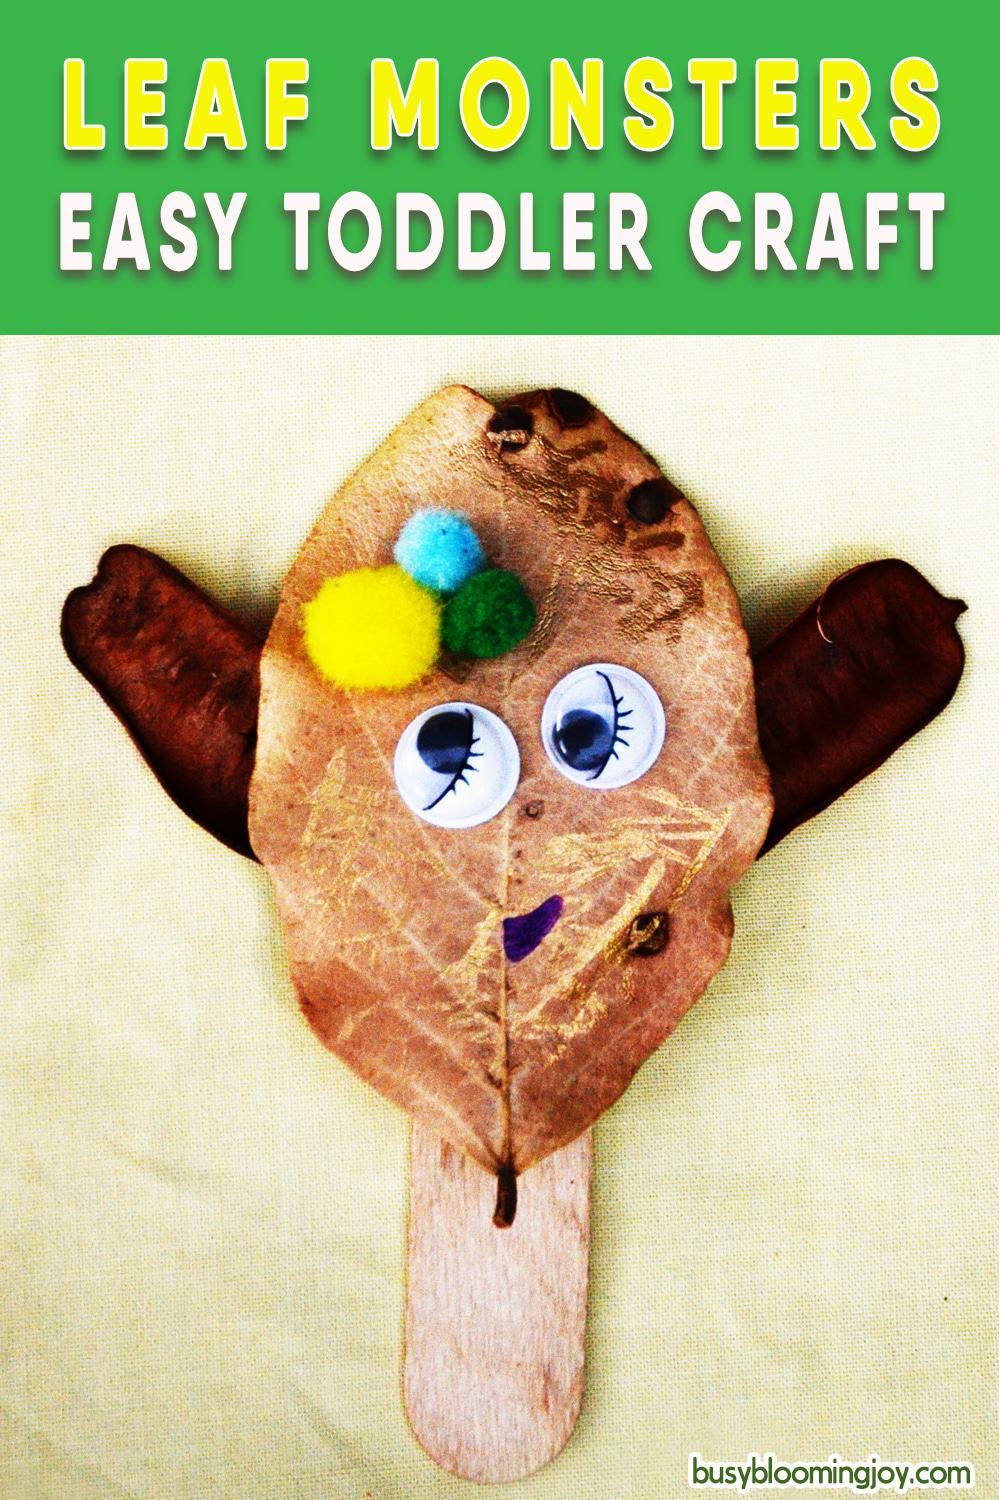 Leaf monster craft for toddlers: super-friendly, sorry scary (!), and perfect for Fall